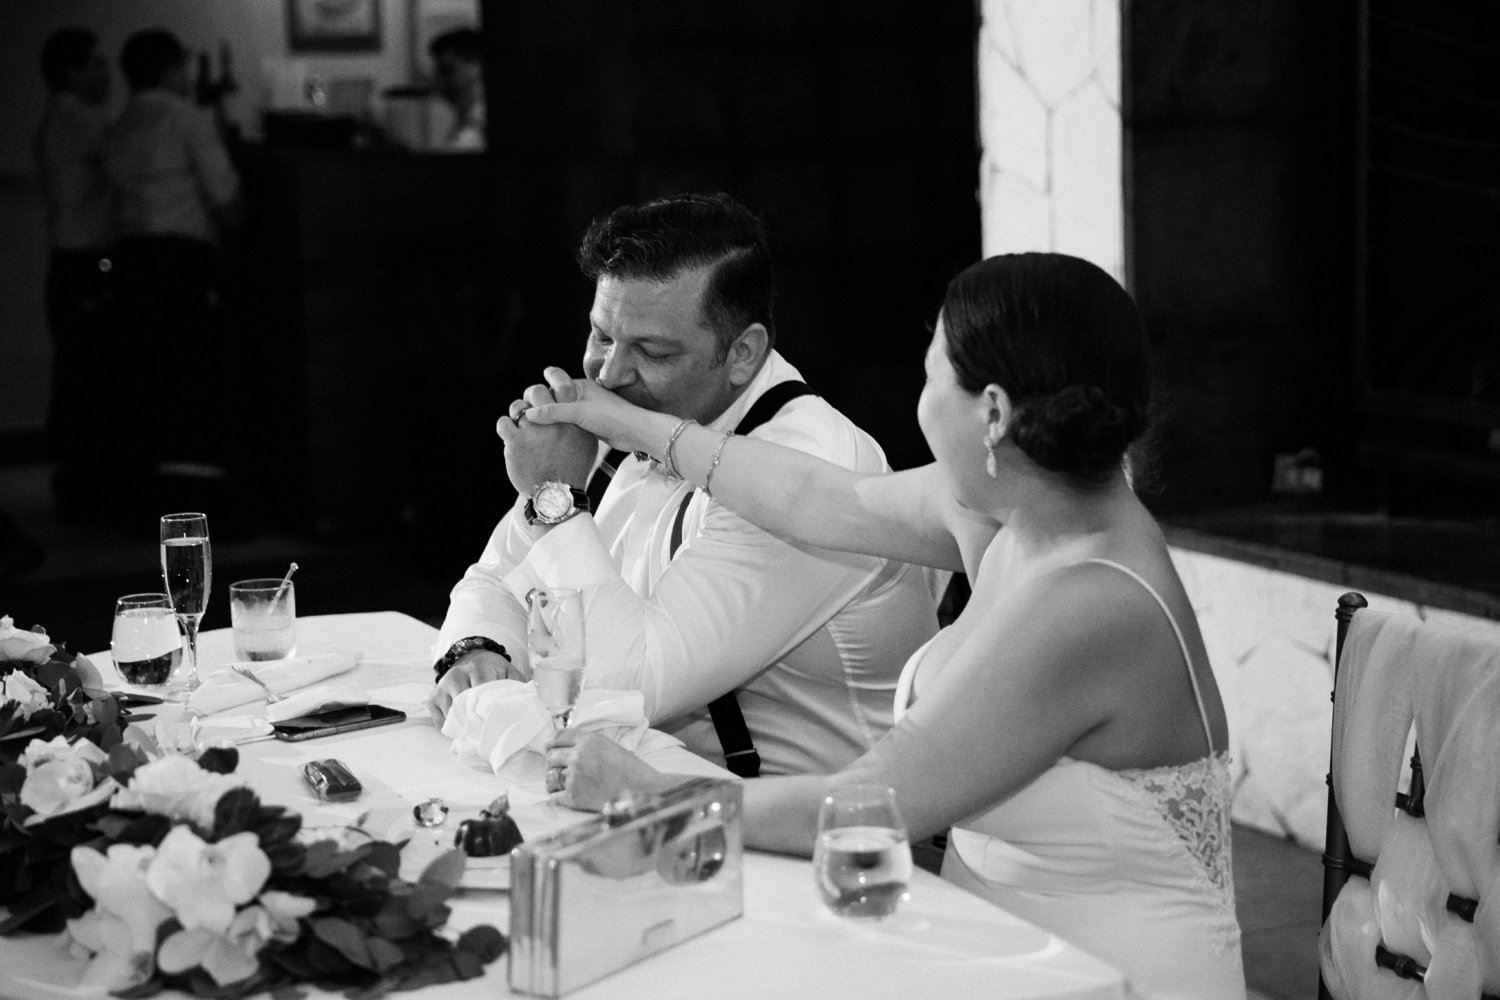  images by feliciathephotographer.com | destination wedding photographer | mexico | tropical | fiji | venue | azul beach resort | riviera maya | reception | dinner | formal setting | bride and groom | head table | black and white | kiss on the hand | 